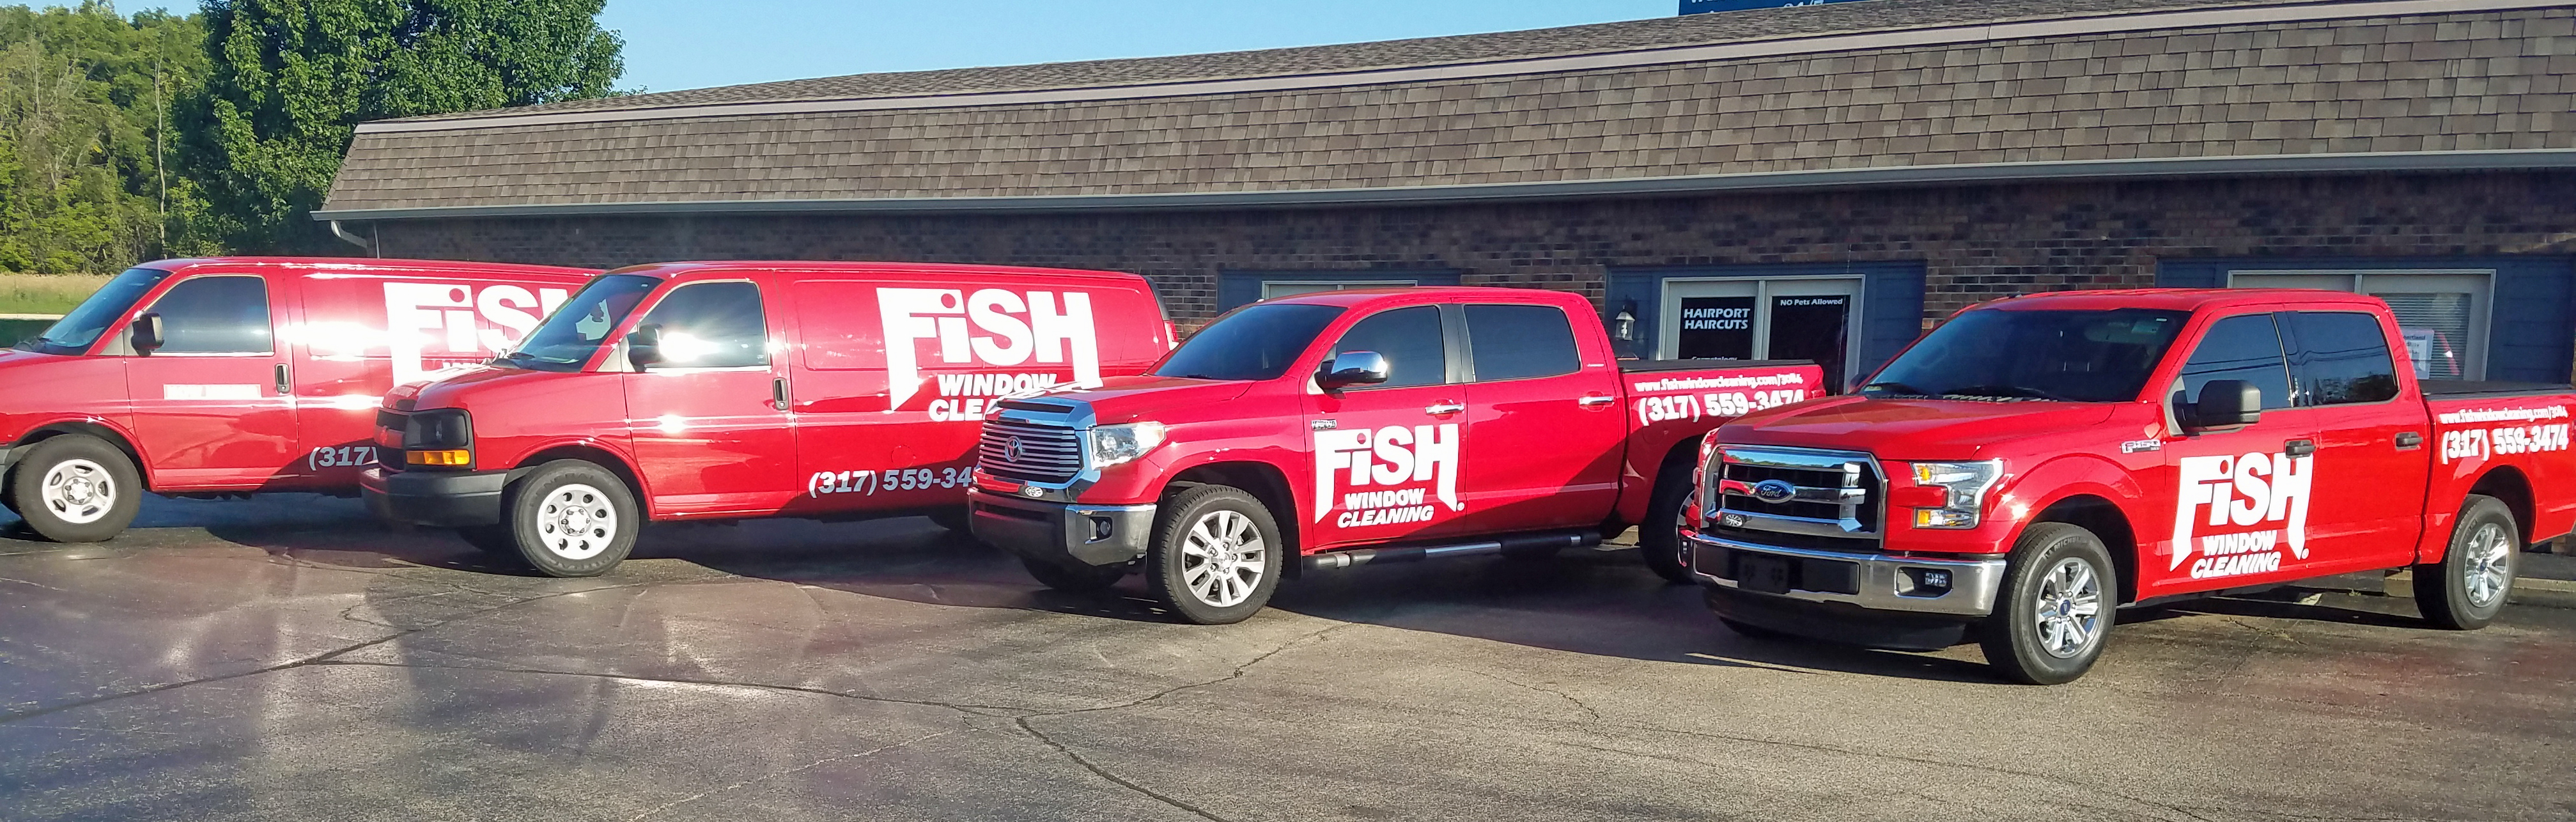 Two Fish Window Cleaning Branded Van and Two Fish Window Cleaning Branded Pickup Trucks